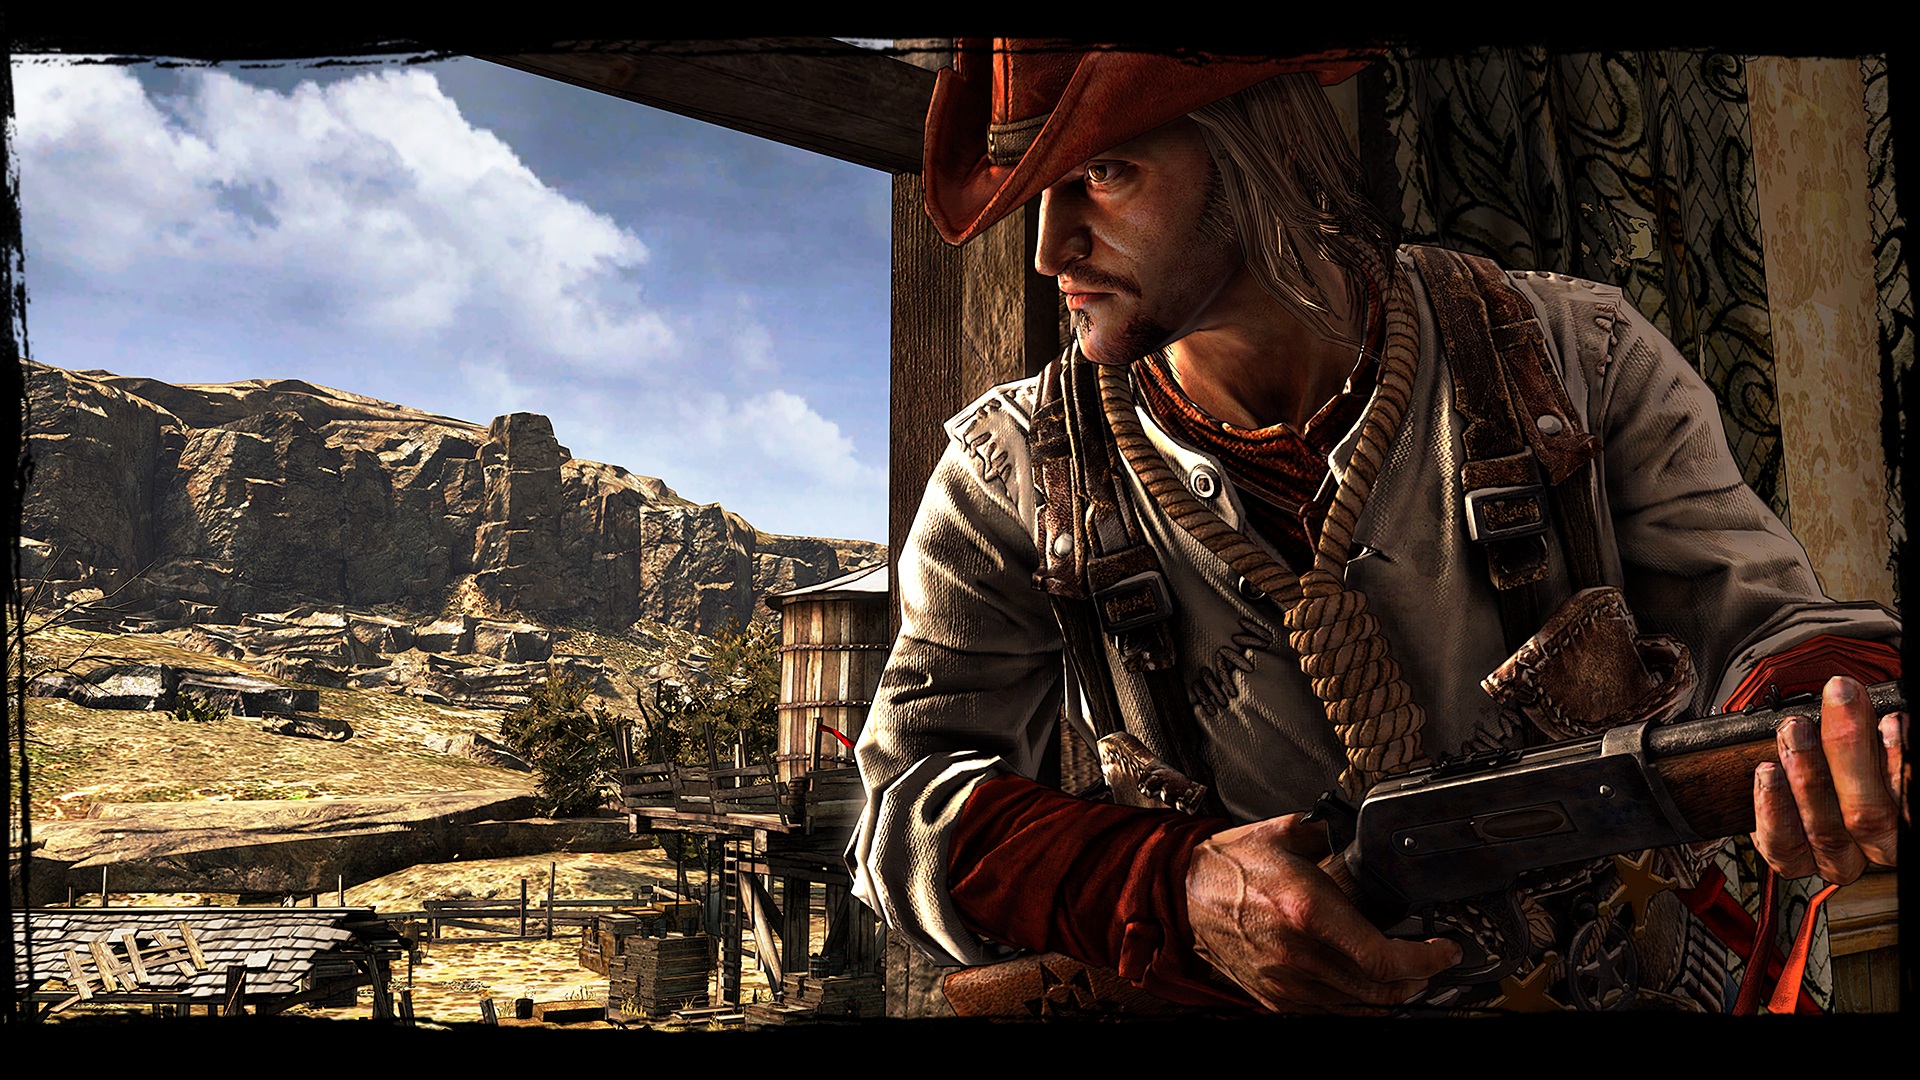 PAX East 2013: Call of Juarez: Gunslinger Not Too Quick On The Draw